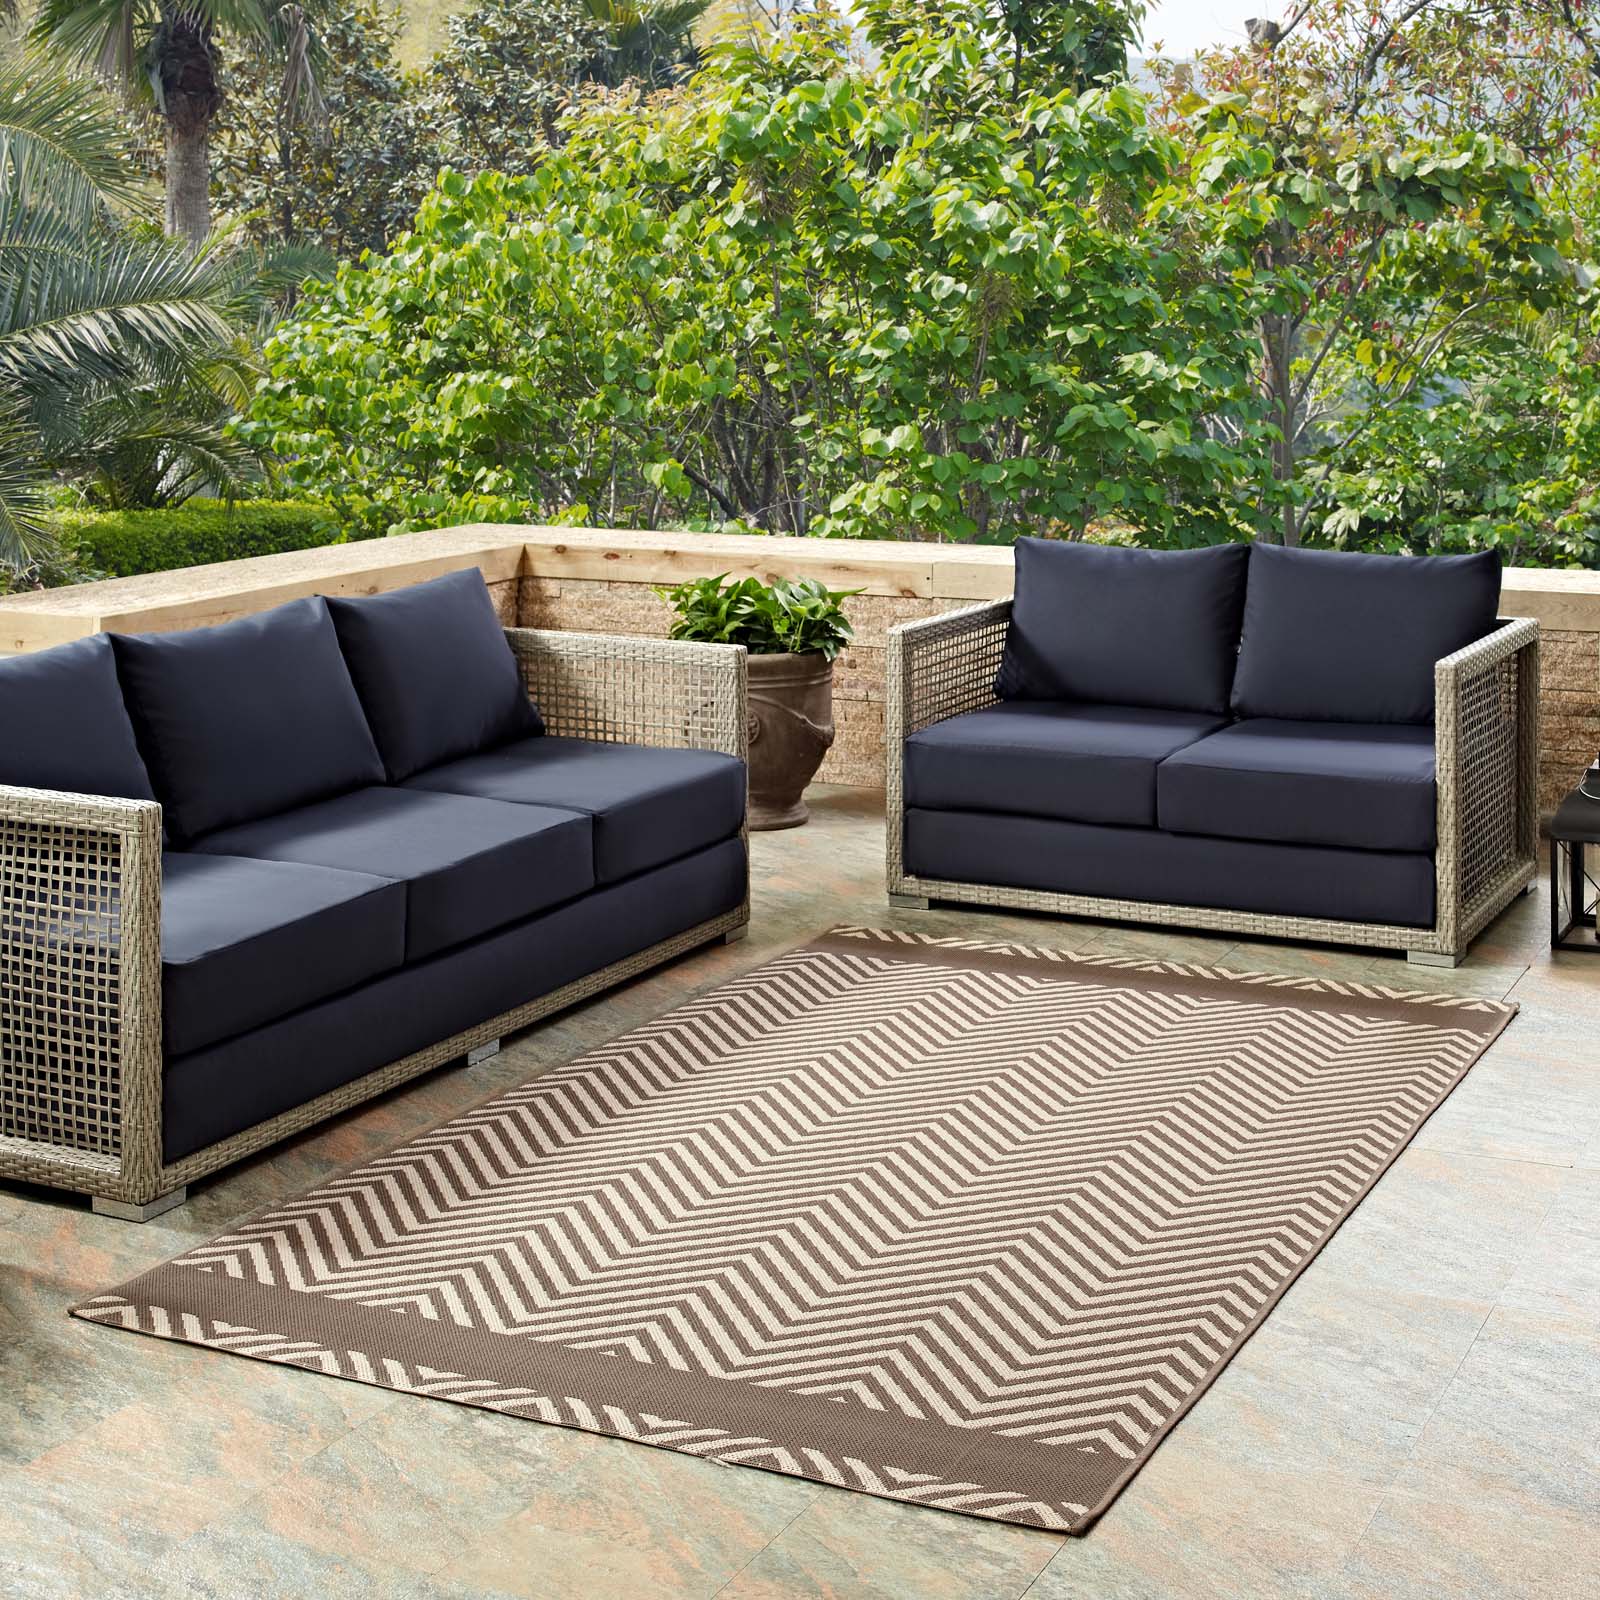 Optica Chevron With End Borders 8x10 Indoor and Outdoor Area Rug-Indoor and Outdoor Area Rug-Modway-Wall2Wall Furnishings